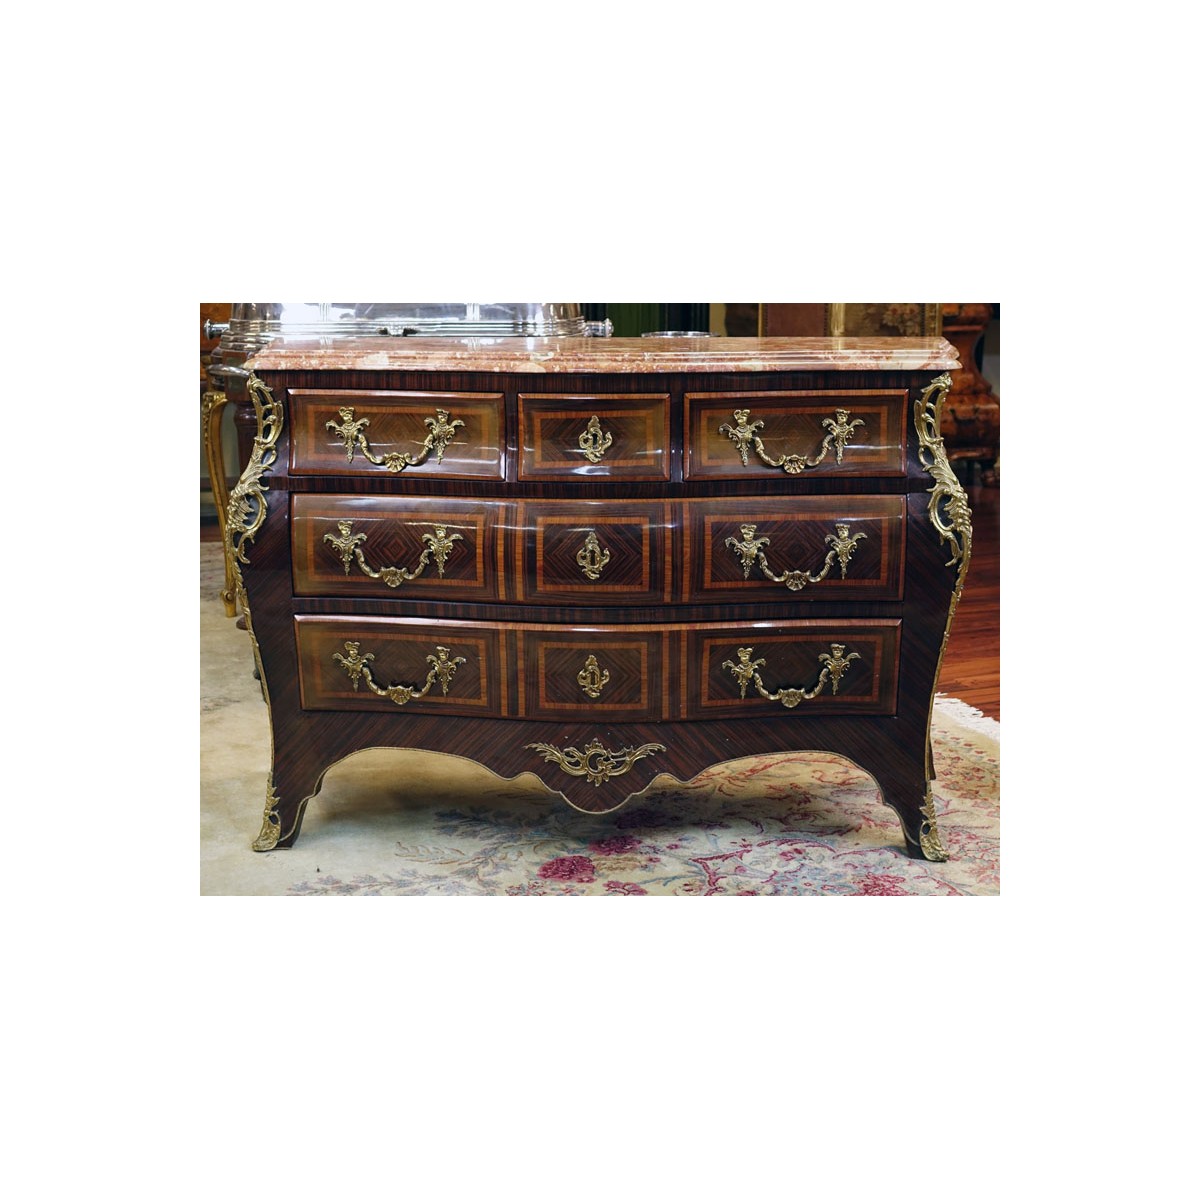 Mid 20th Century Regence Style Gilt Bronze Mounted Kingwood Marquetry Inlaid Marble Top Commode en